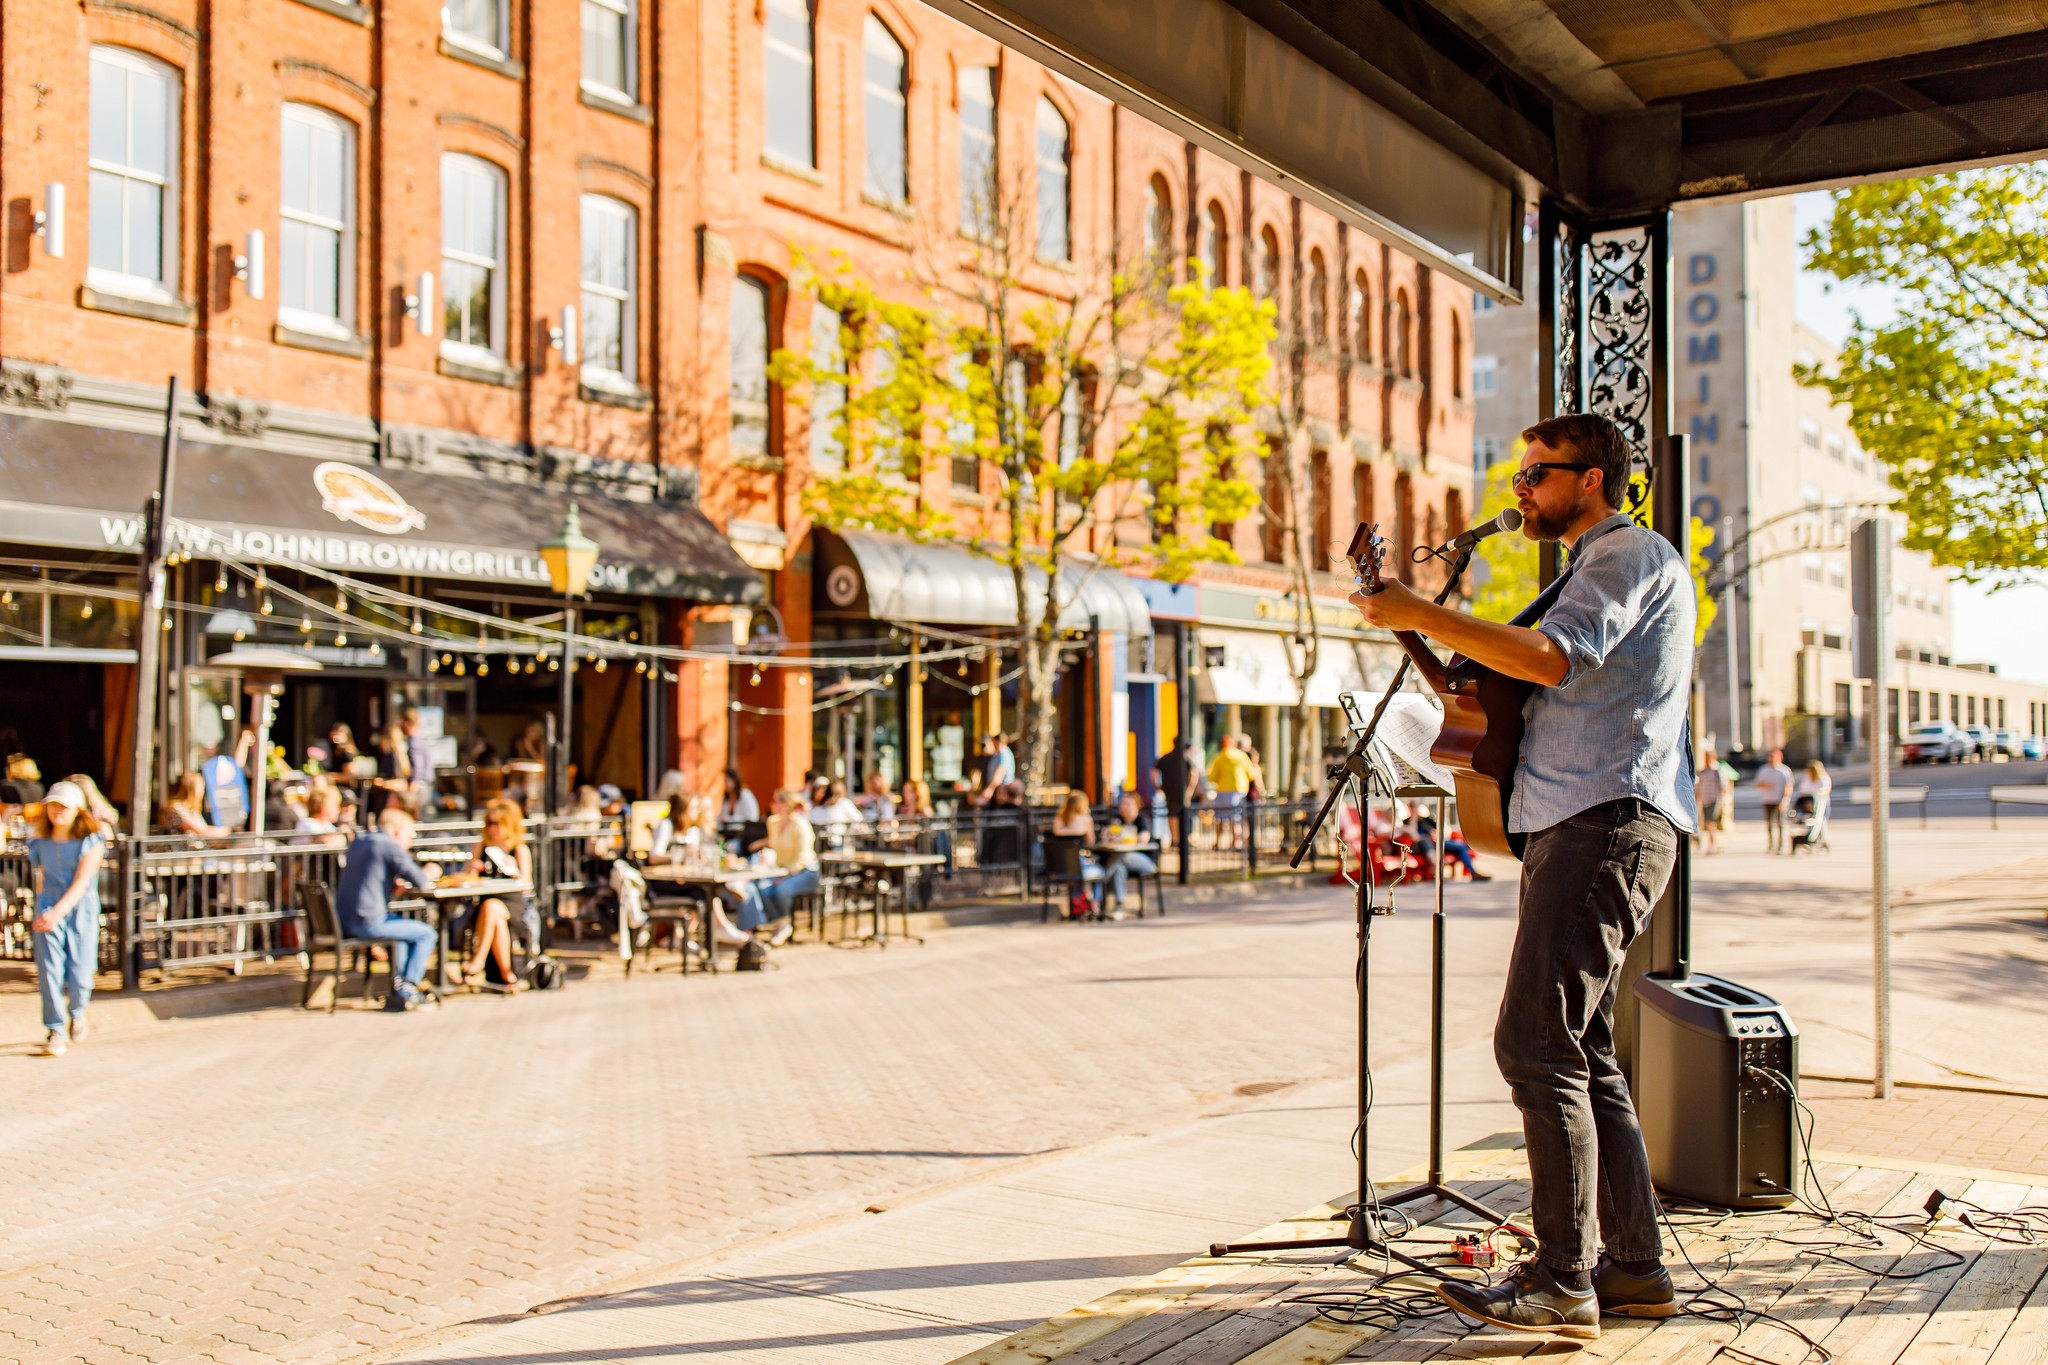 A musician performs on stage on Victoria Row, Charlottetown.